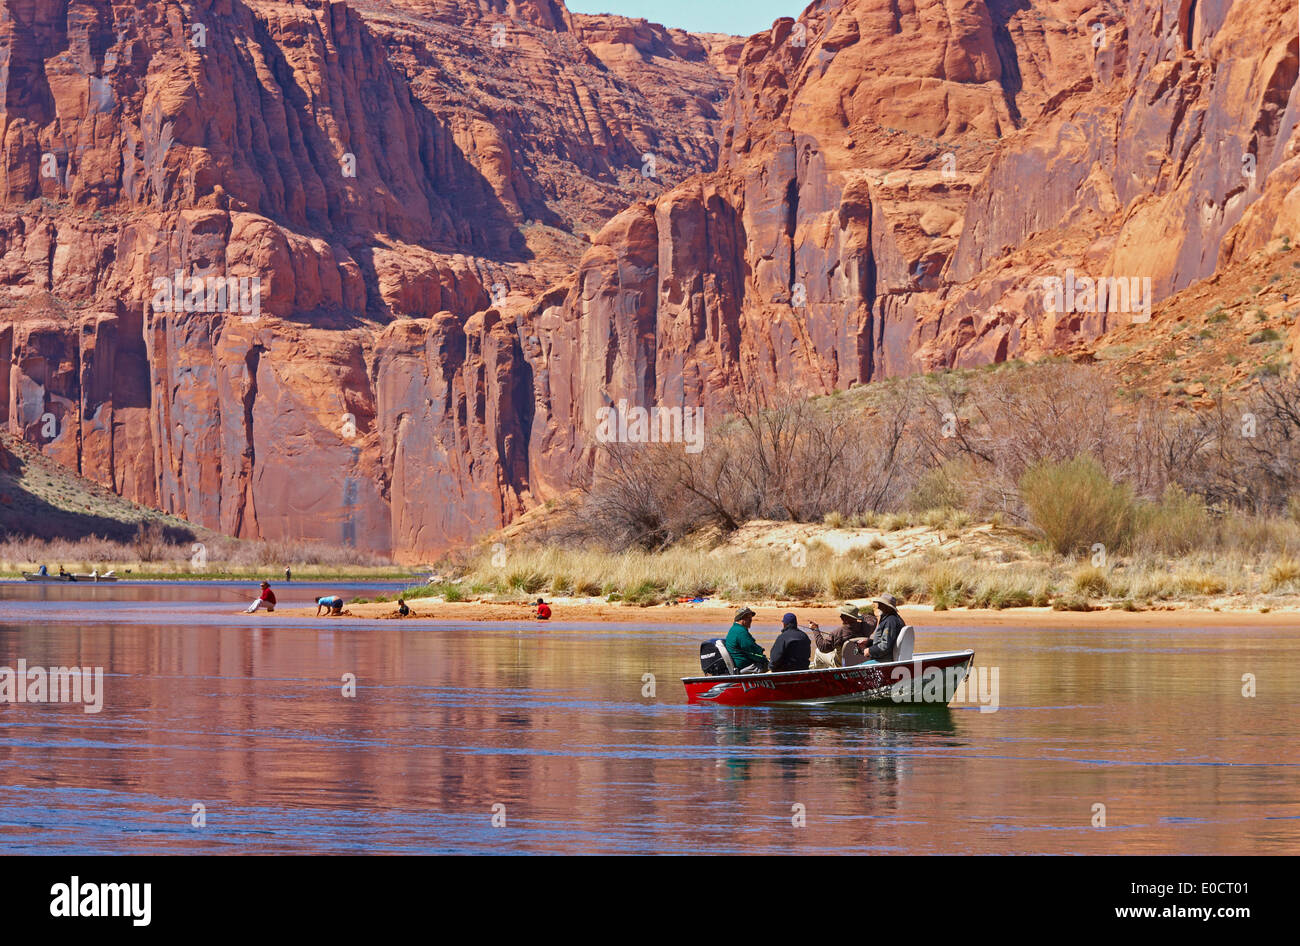 People in a boat on the Colorado river from Glen Canyon Dam to Lees Ferry, Glen Canyon, Arizona, USA, America Stock Photo